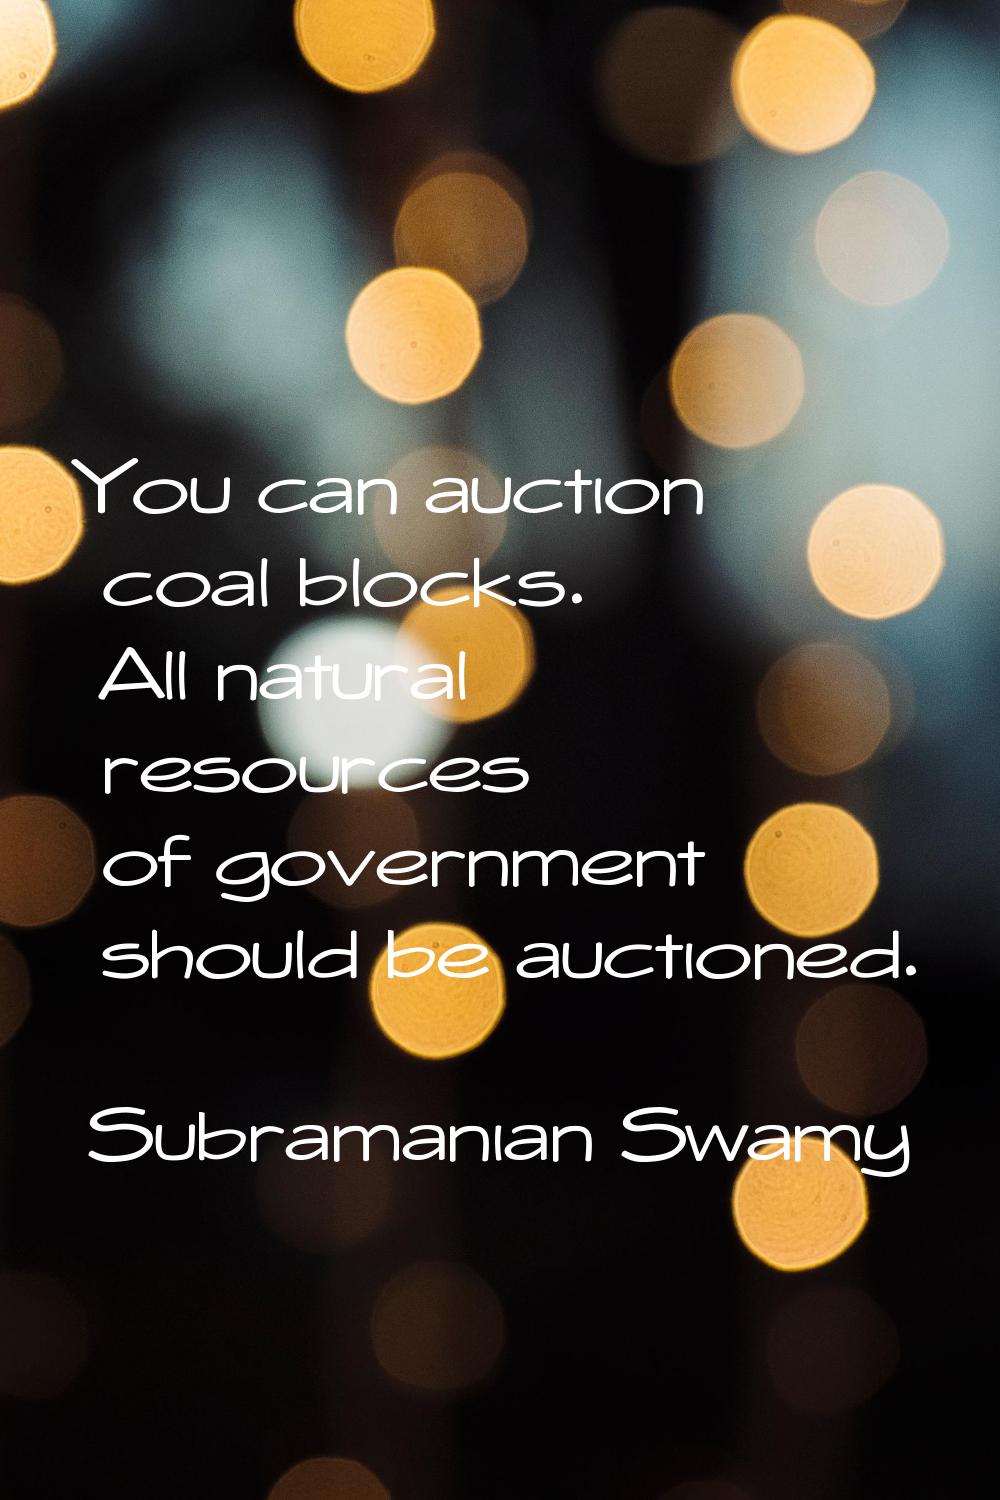 You can auction coal blocks. All natural resources of government should be auctioned.